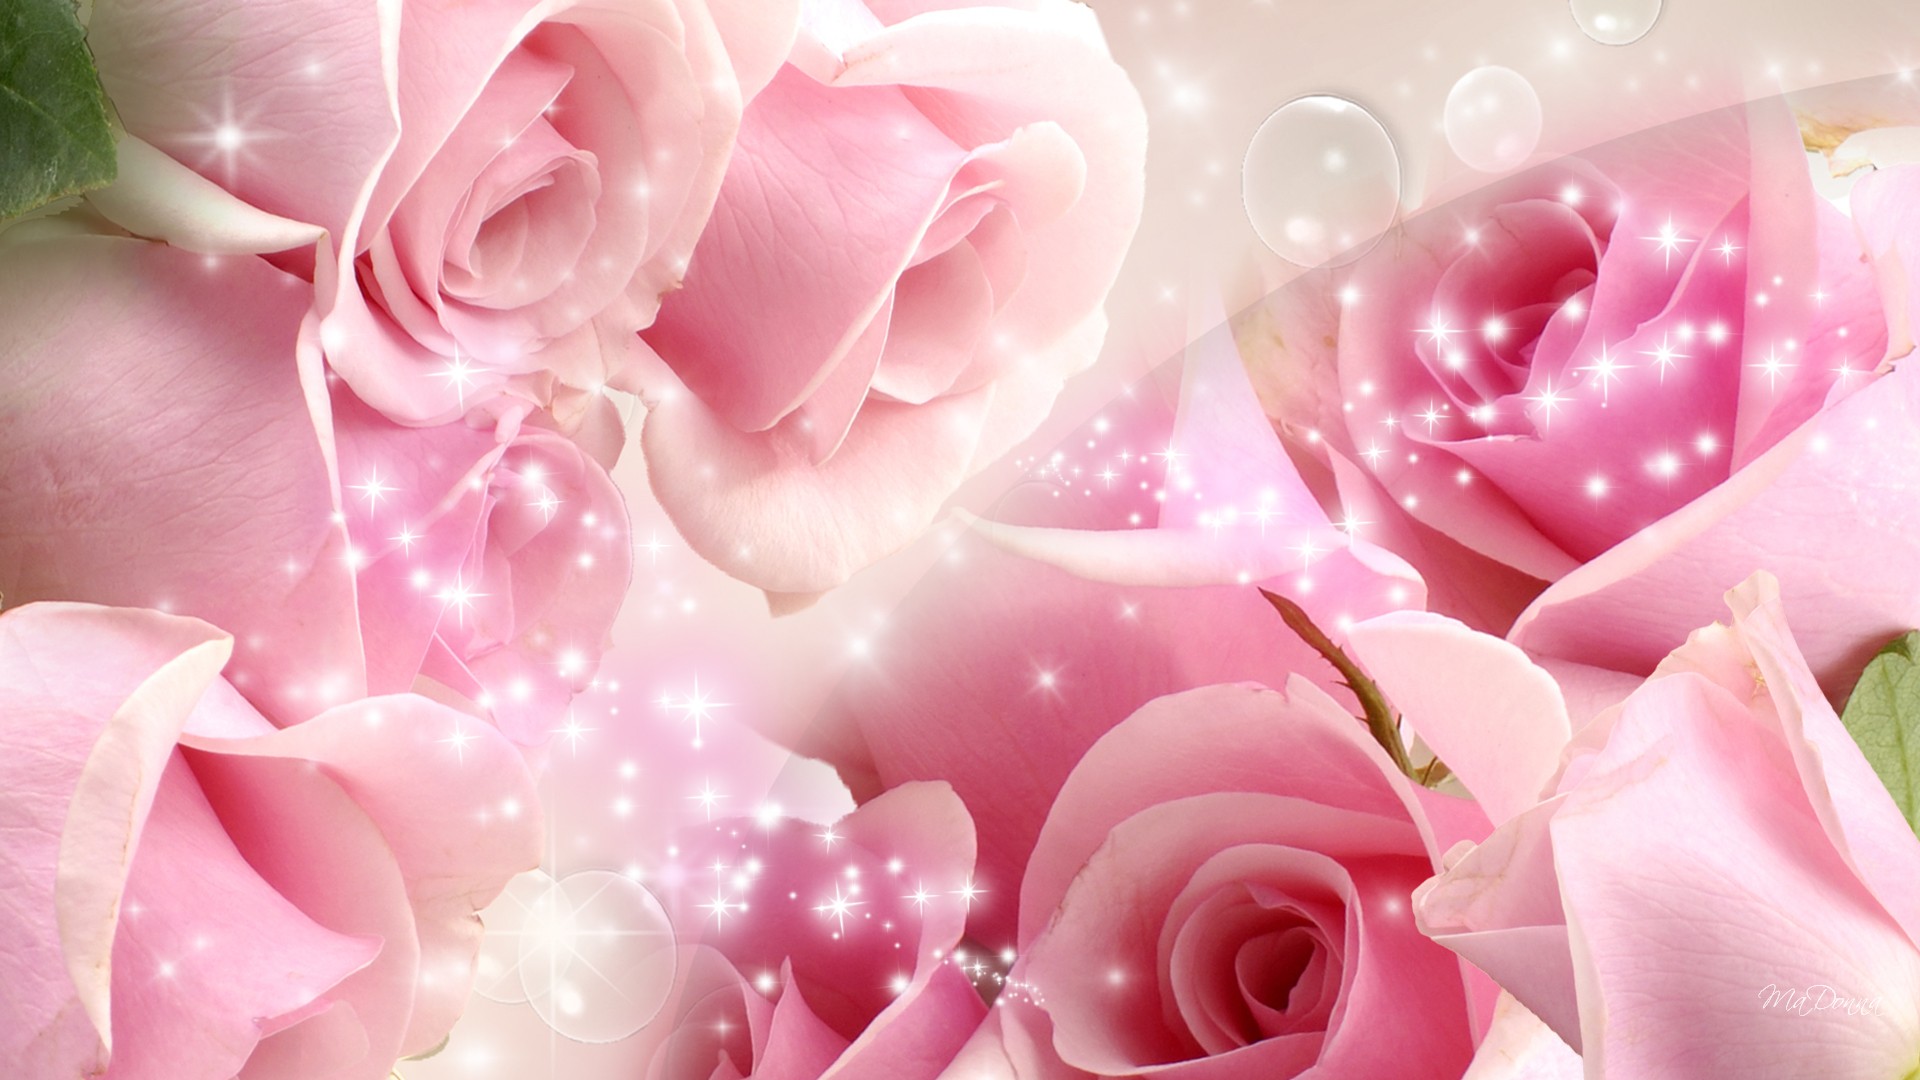 Pink Roses Hd Wallpapers Free Download , HD Wallpaper & Backgrounds